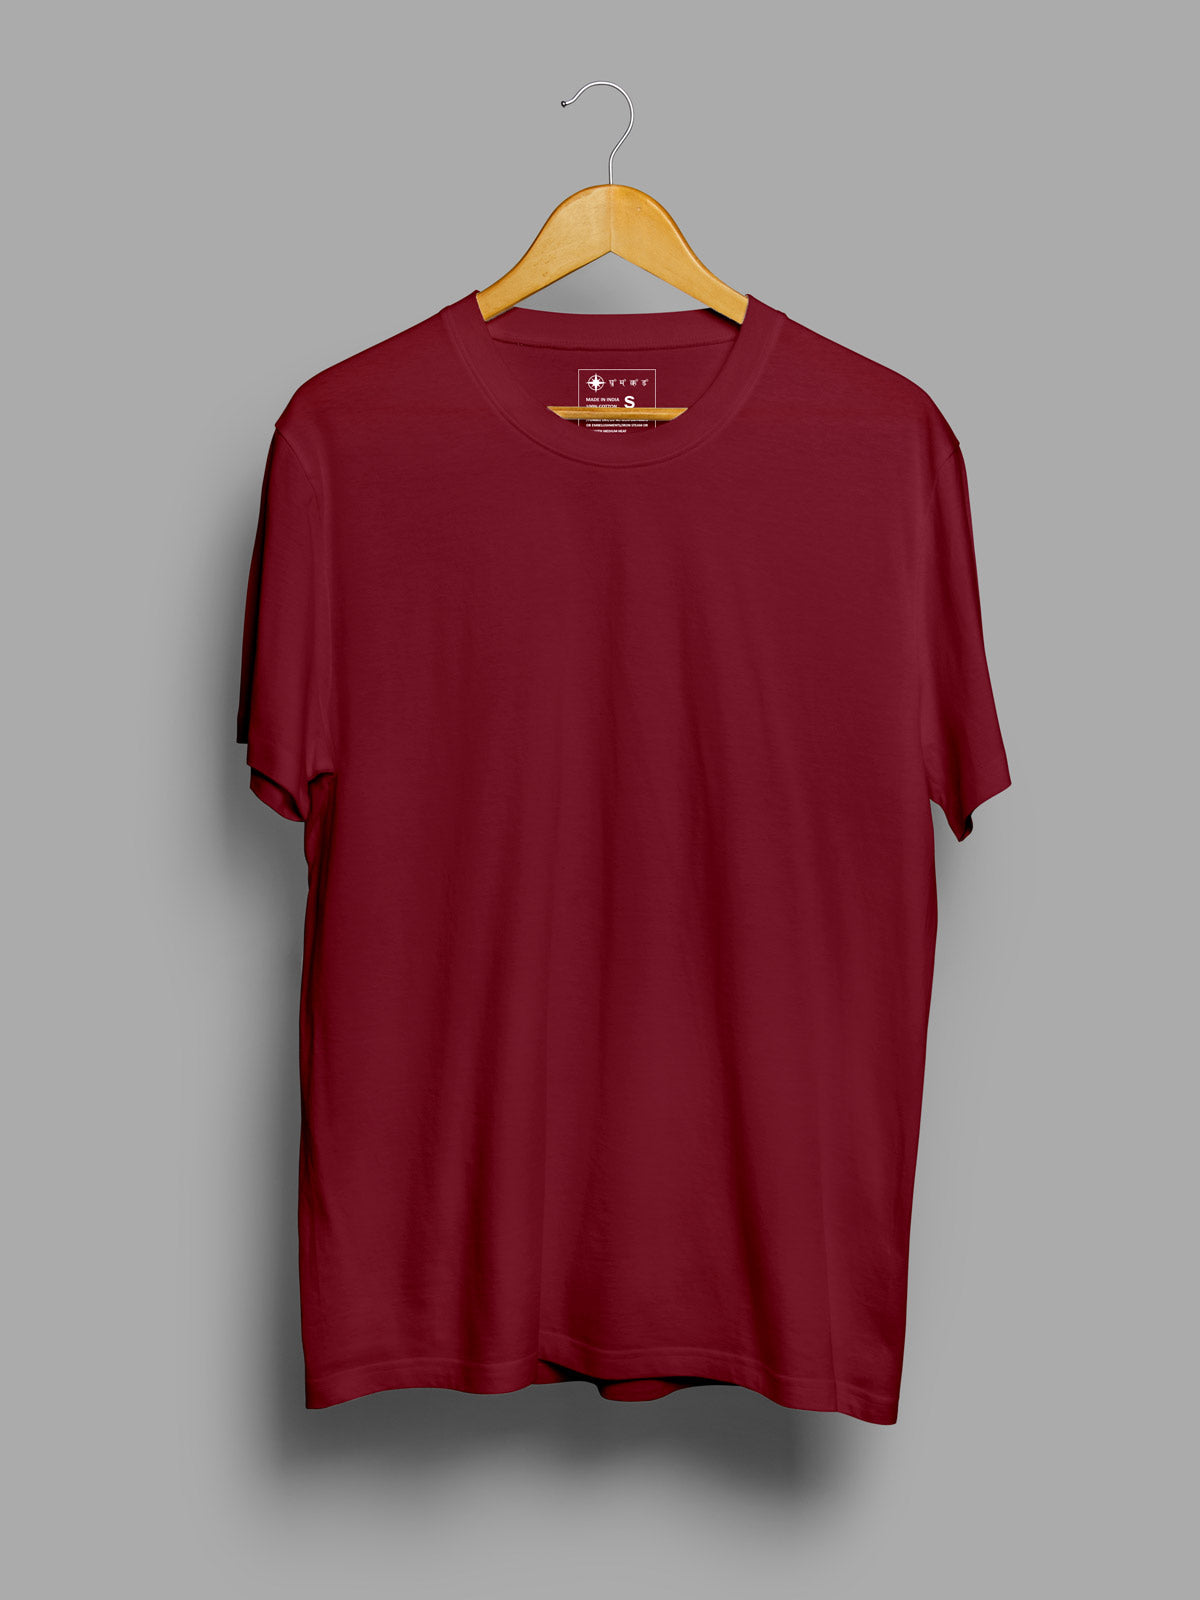 Pack of 2 | Maroon & Forest Green Unisex Plain T shirt